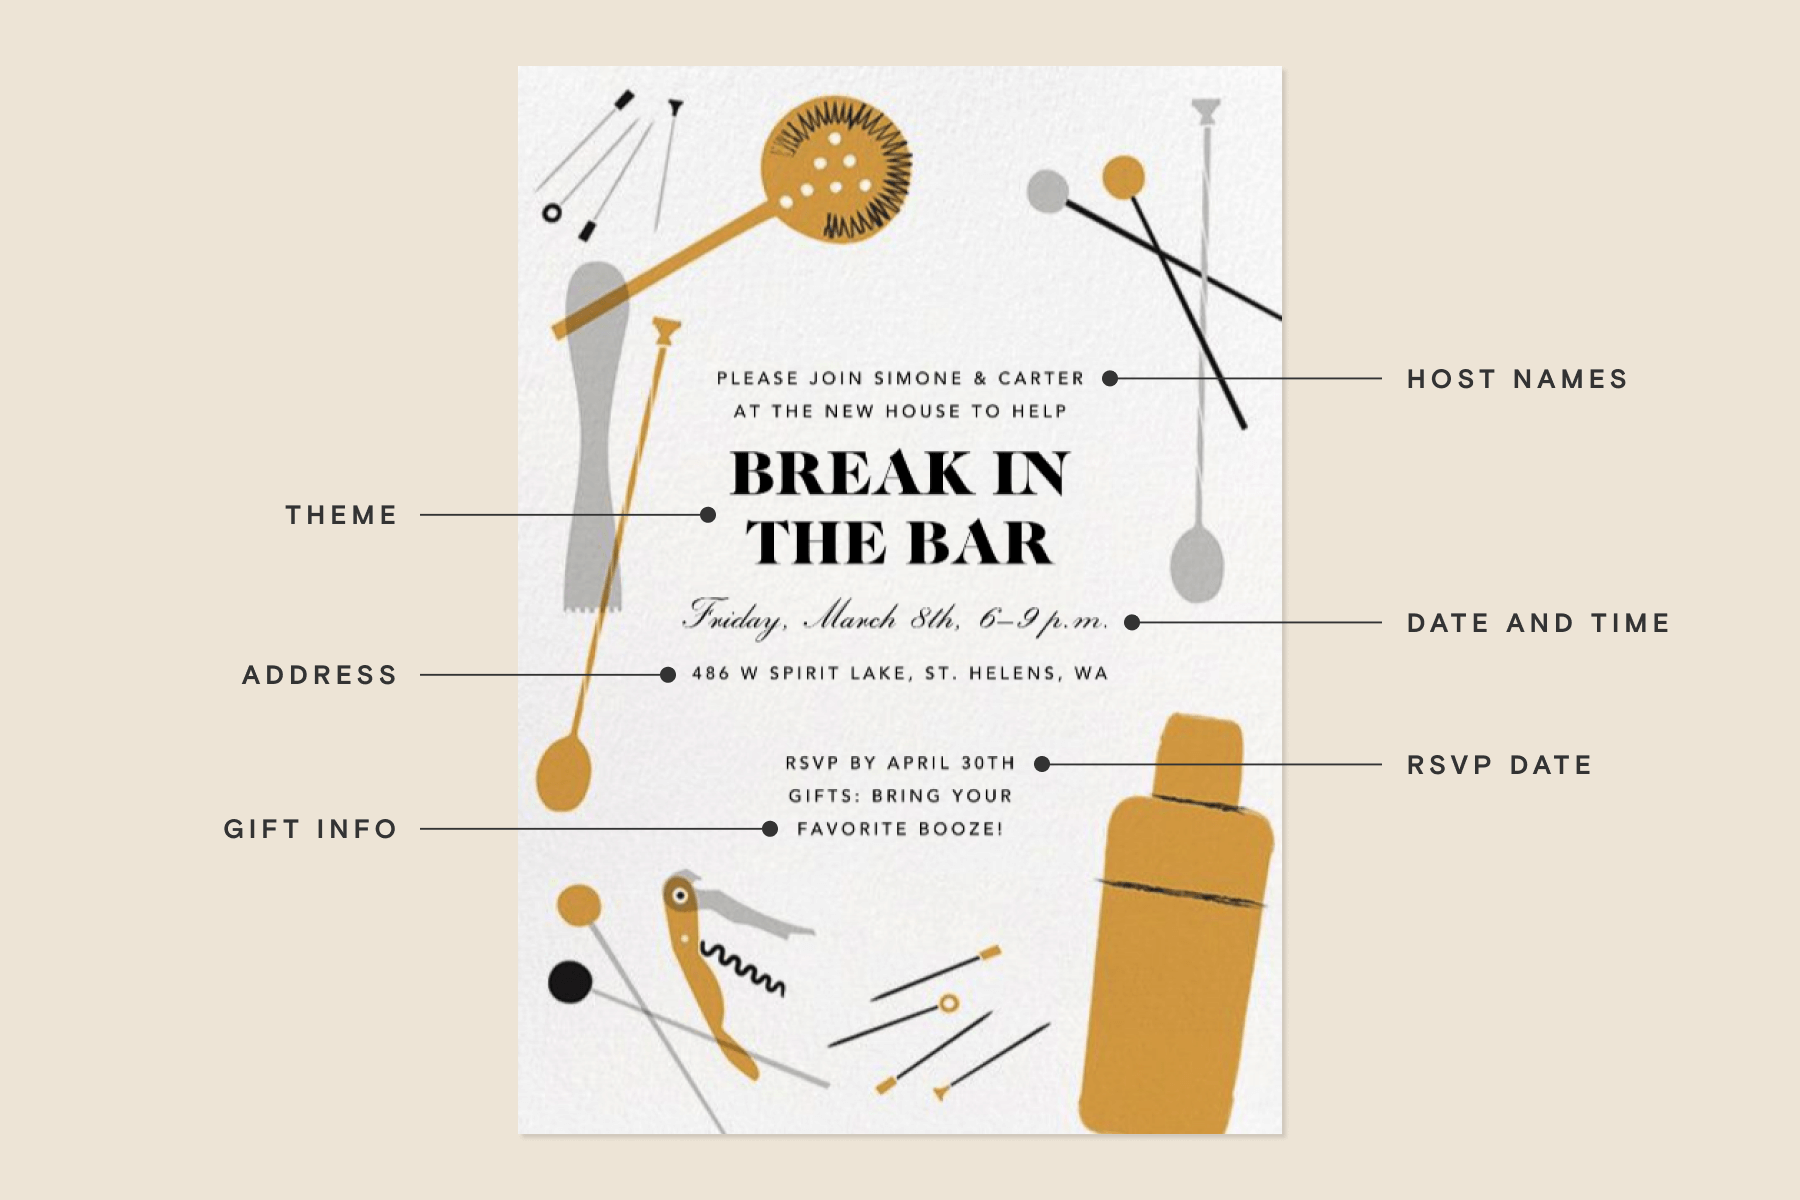 An invitation to “Break in the bar” has simplified illustrations of home bar tools like a shaker, strainer, and olive picks. An infographic element breaks down different aspects of the invitation, such as host names, theme, address, date and time, and RSVP date.